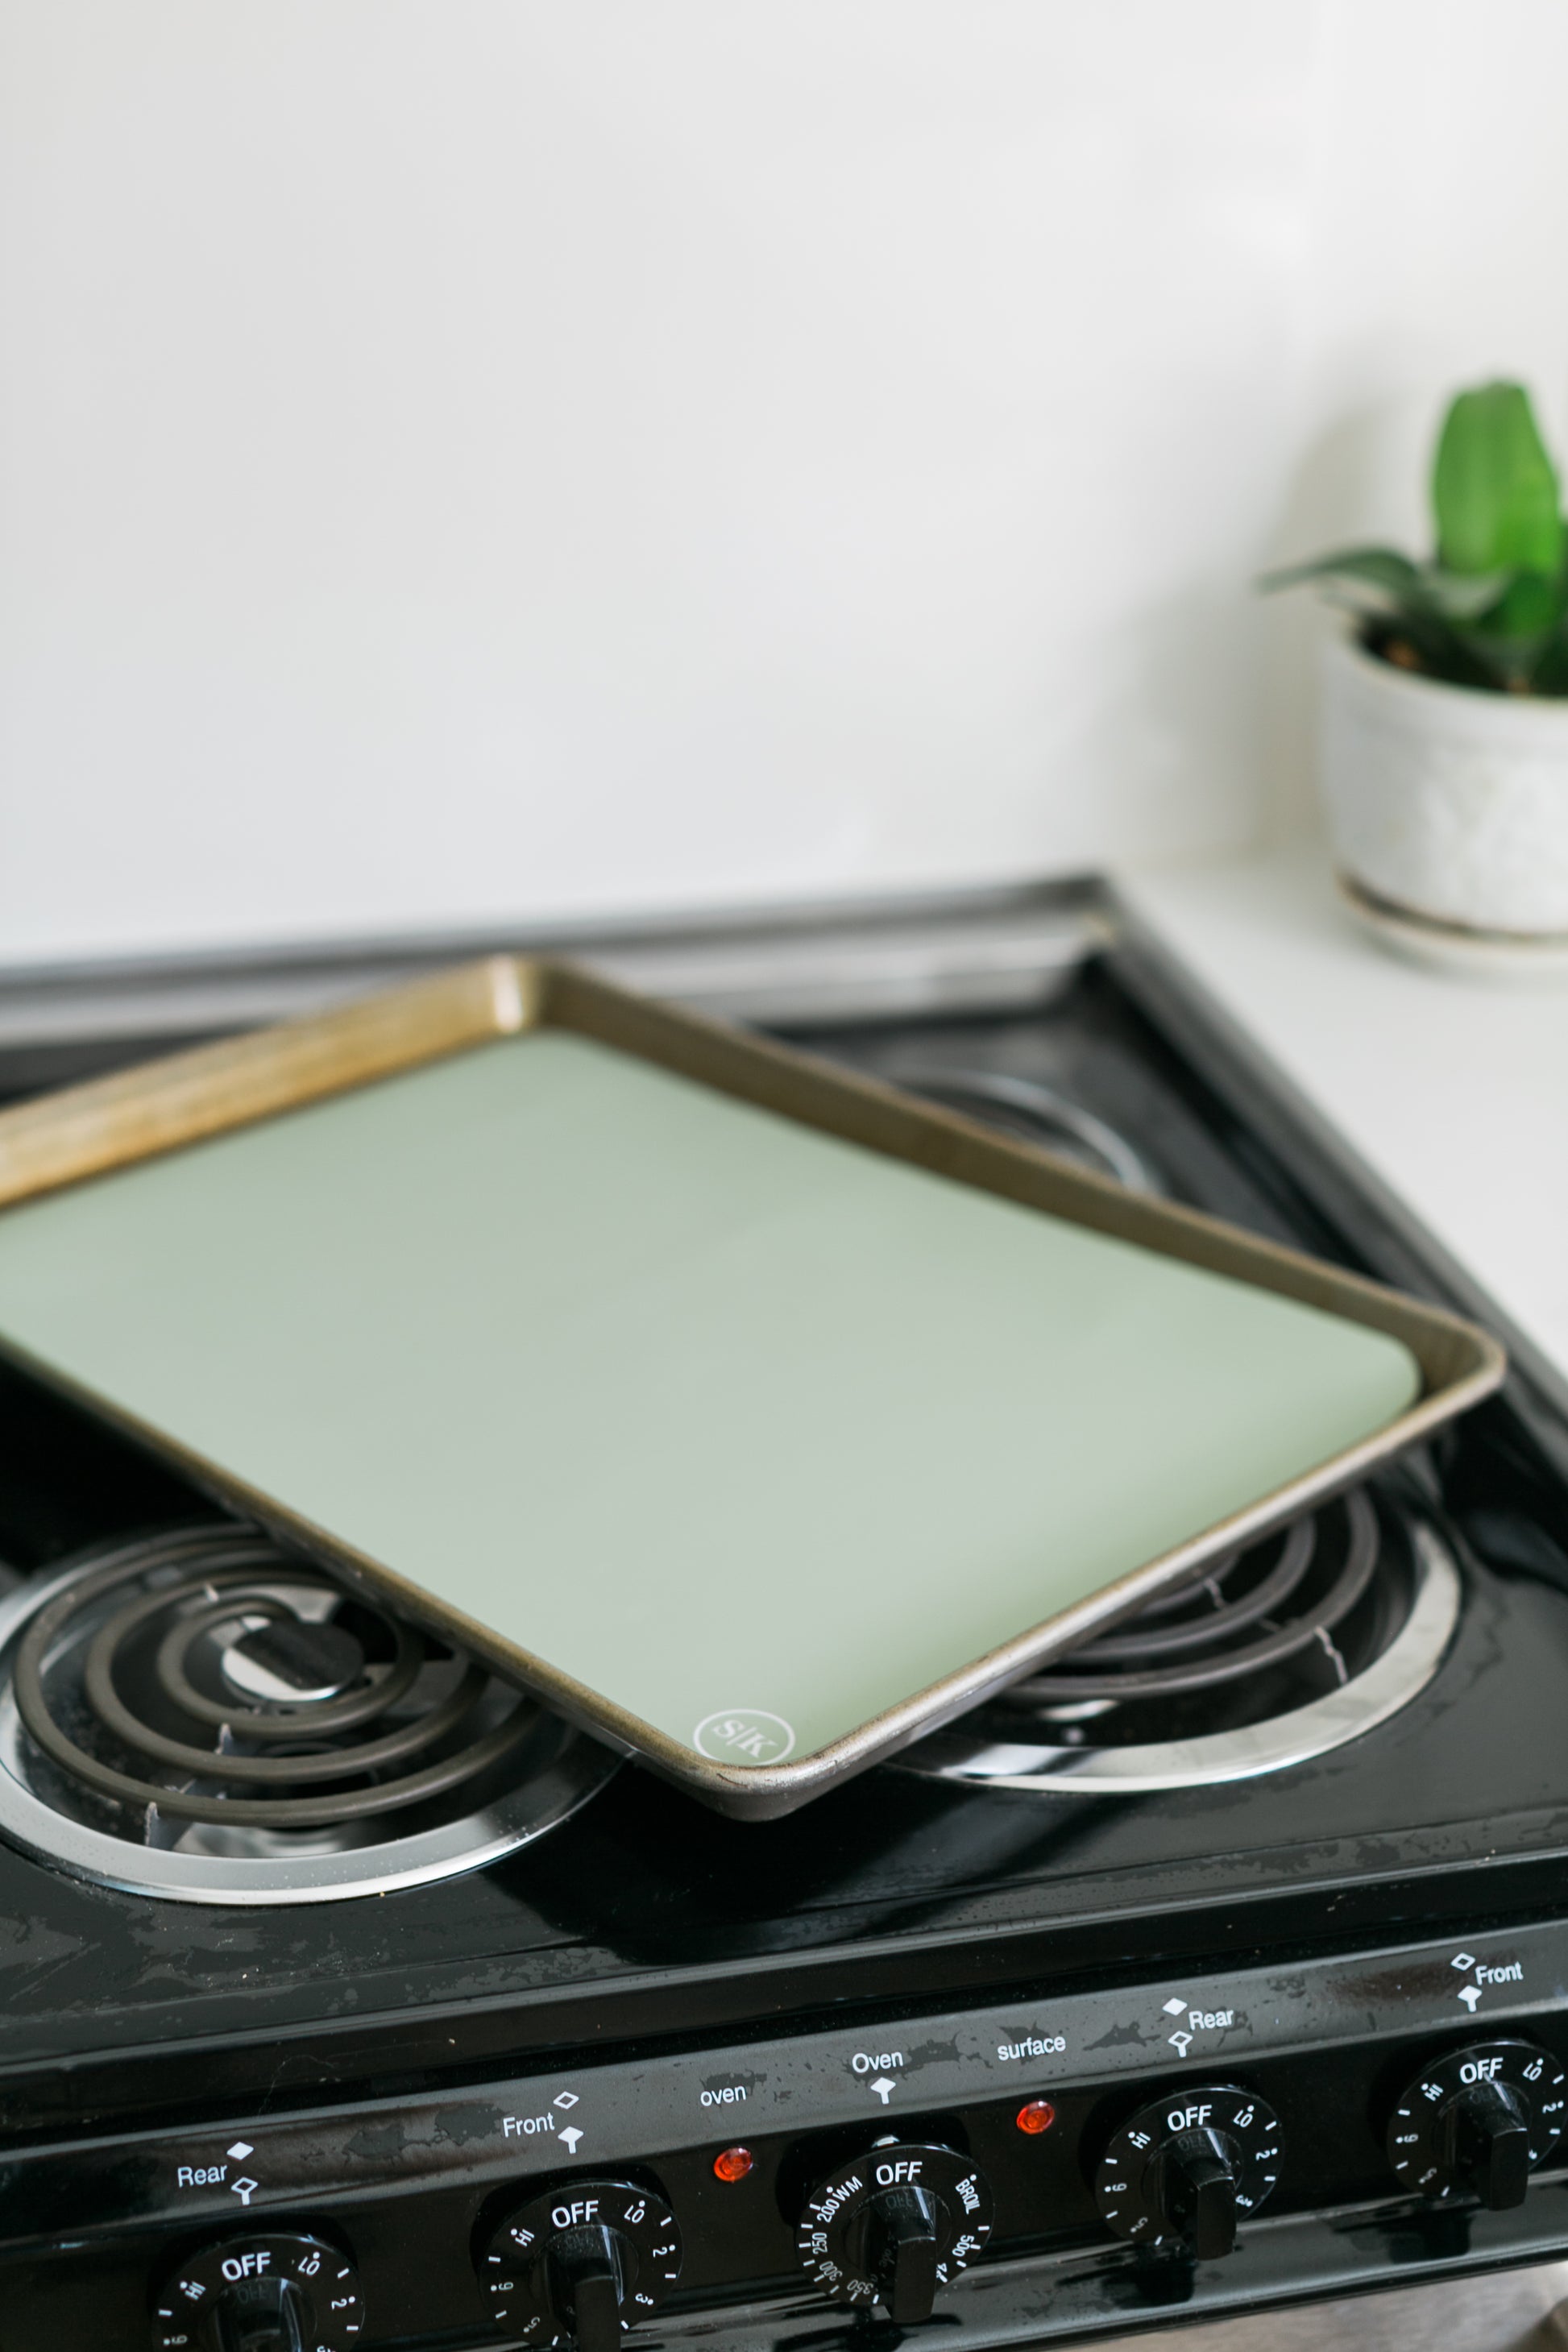 The Silicone Kitchen Silicone Oven Baking Mats - Set of Two, BPA Free, Extra Thick - Half Sheet (16x11.75) - Green/Gray